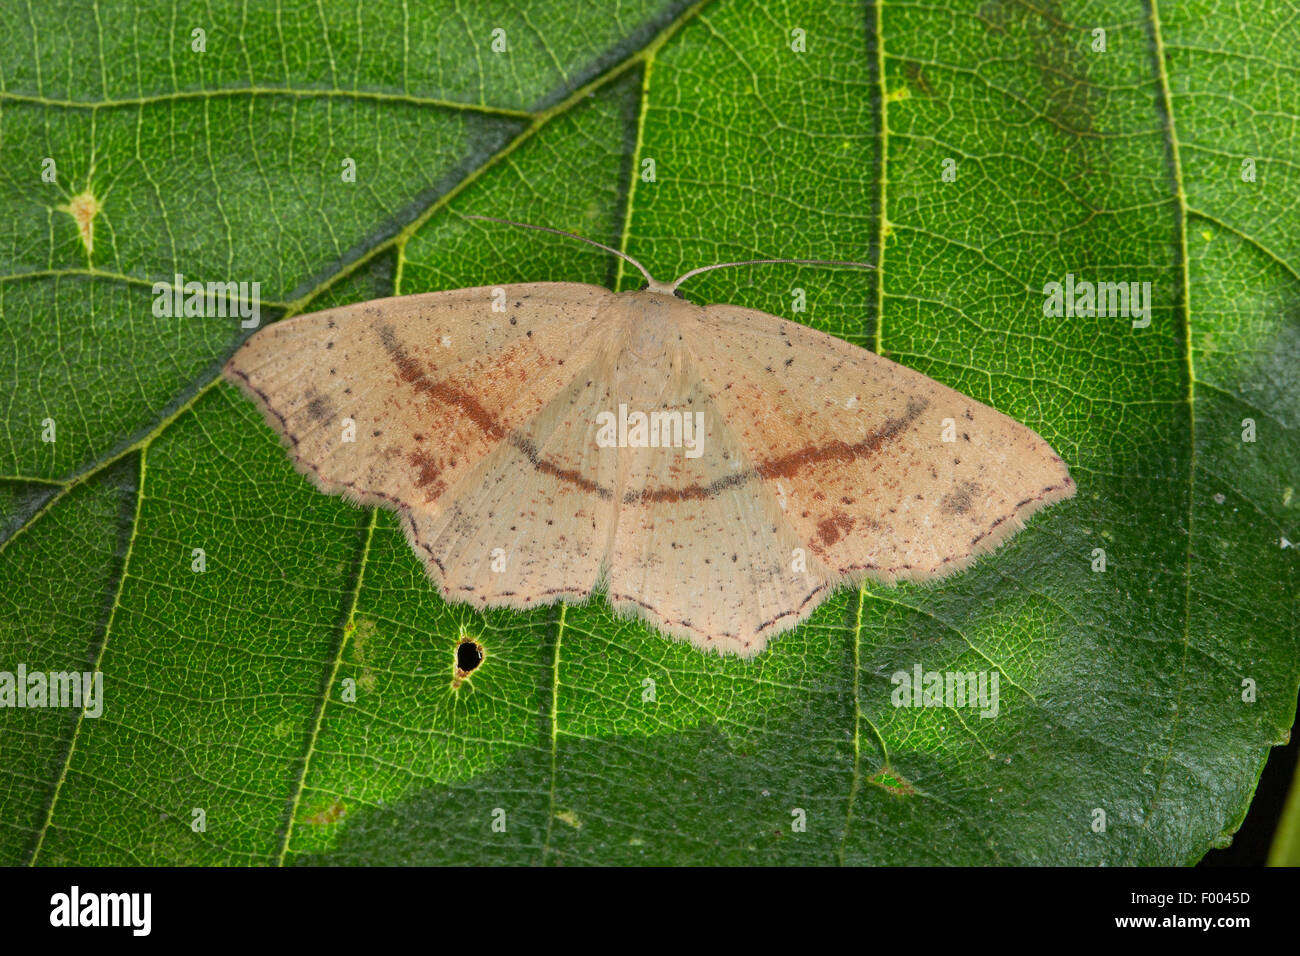 Maiden's blush moth (Cosymbia punctaria, Cyclophora punctaria), on a leaf, Germany Stock Photo